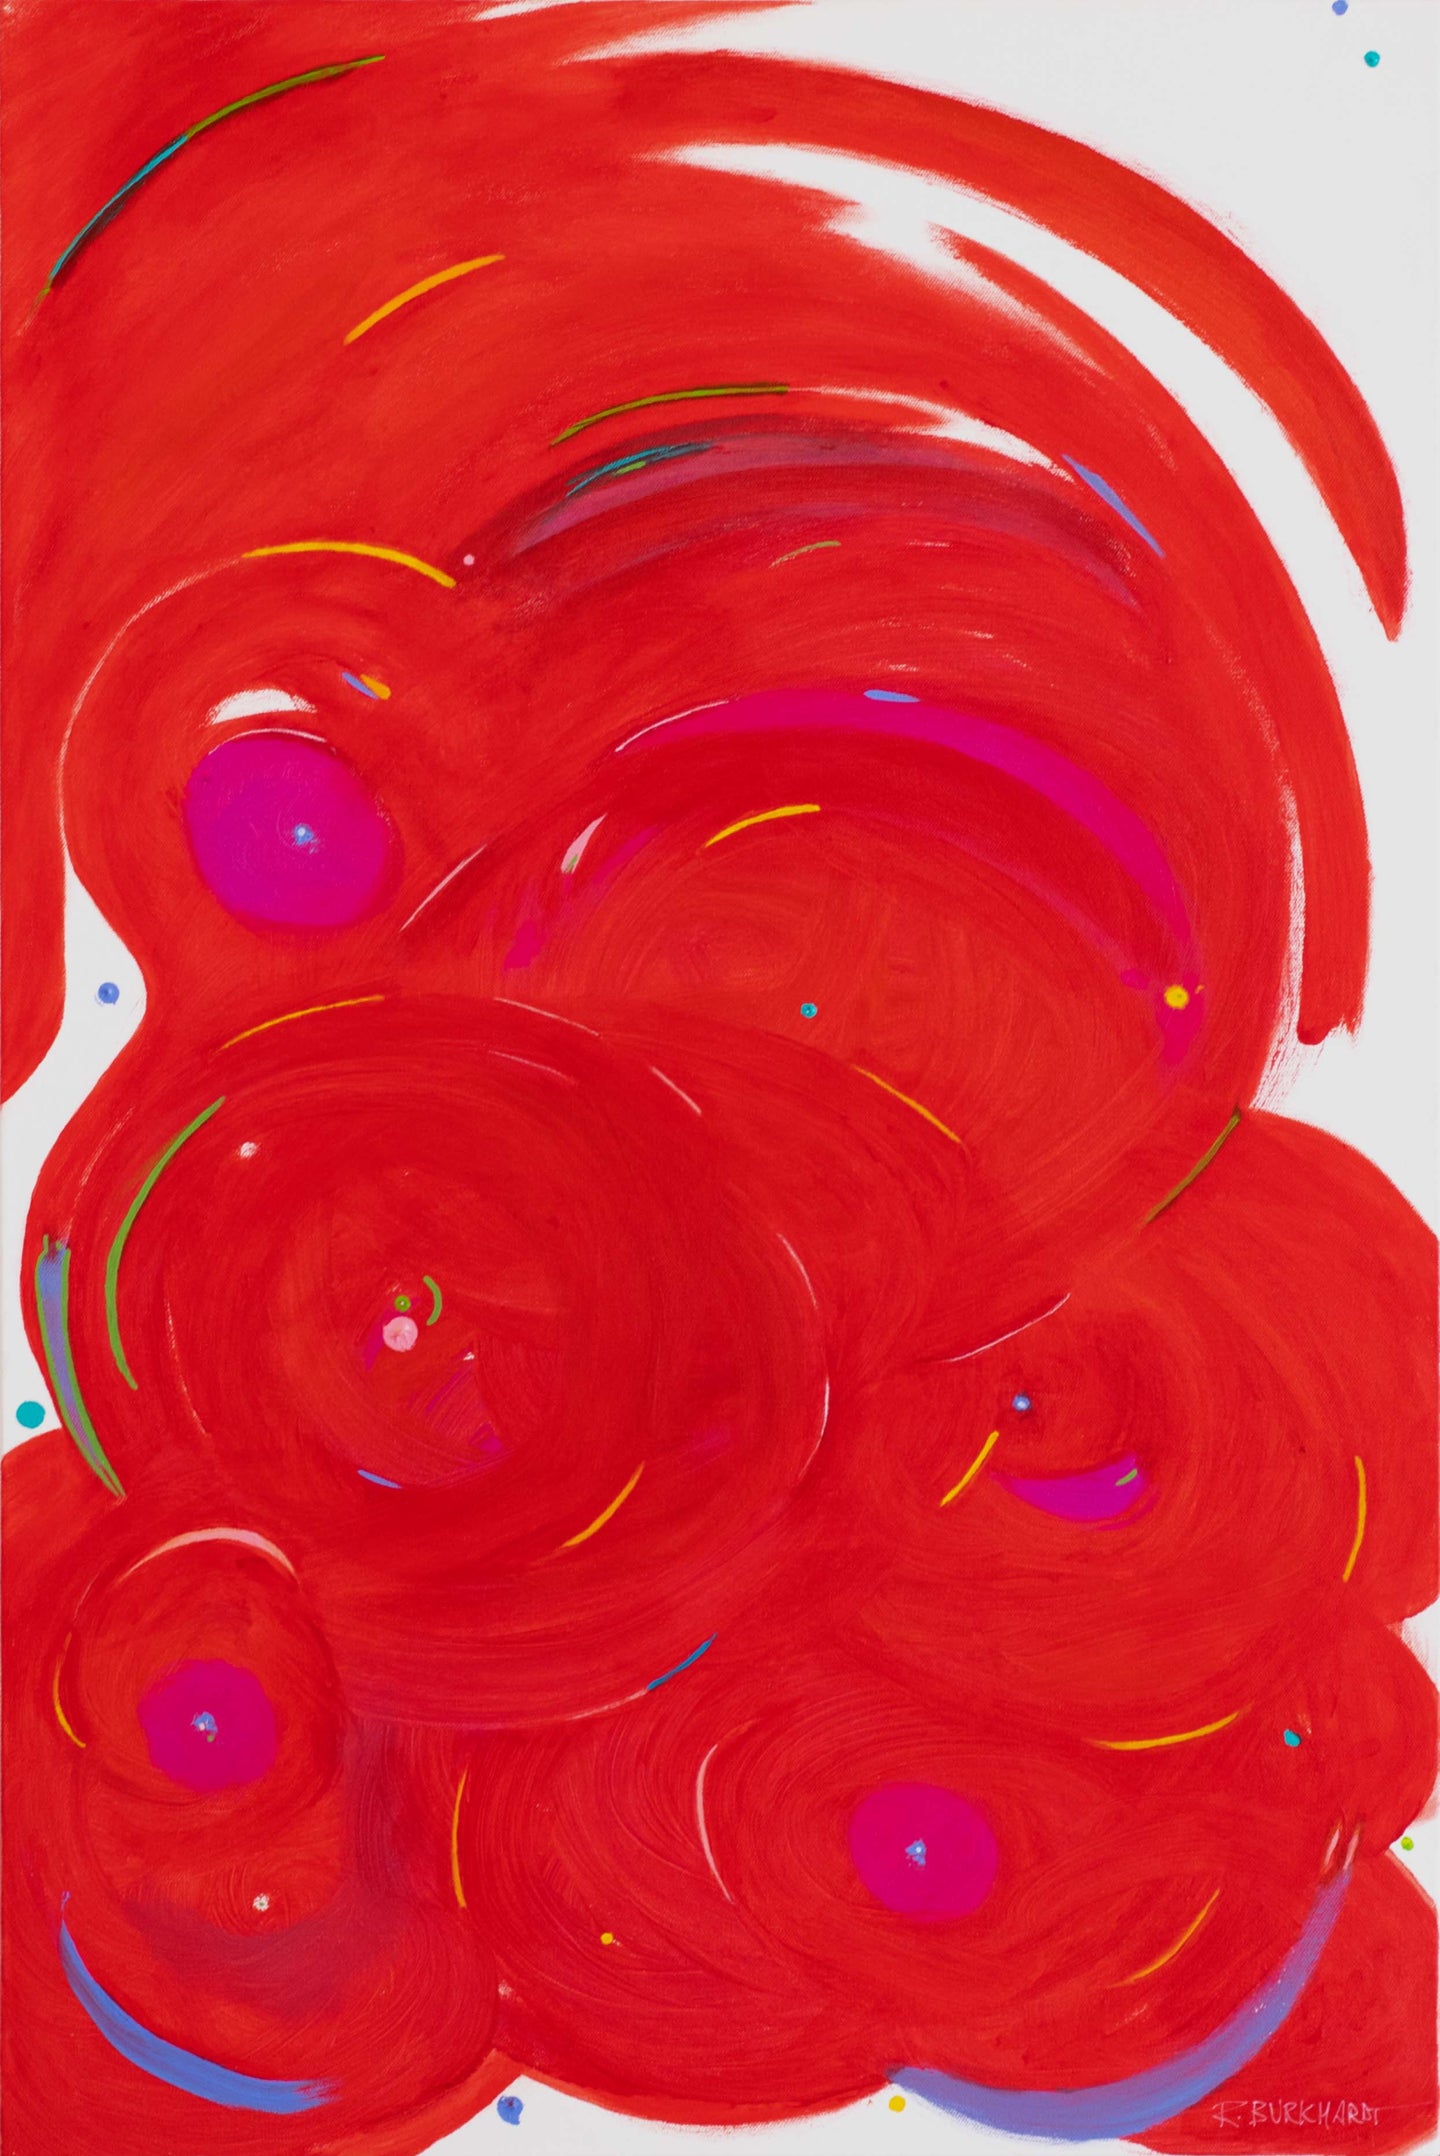 Ron Burkhardt, Voluptuous Circles, 2022, Acrylic on canvas, 40 x 30 inches, red abstract wall art